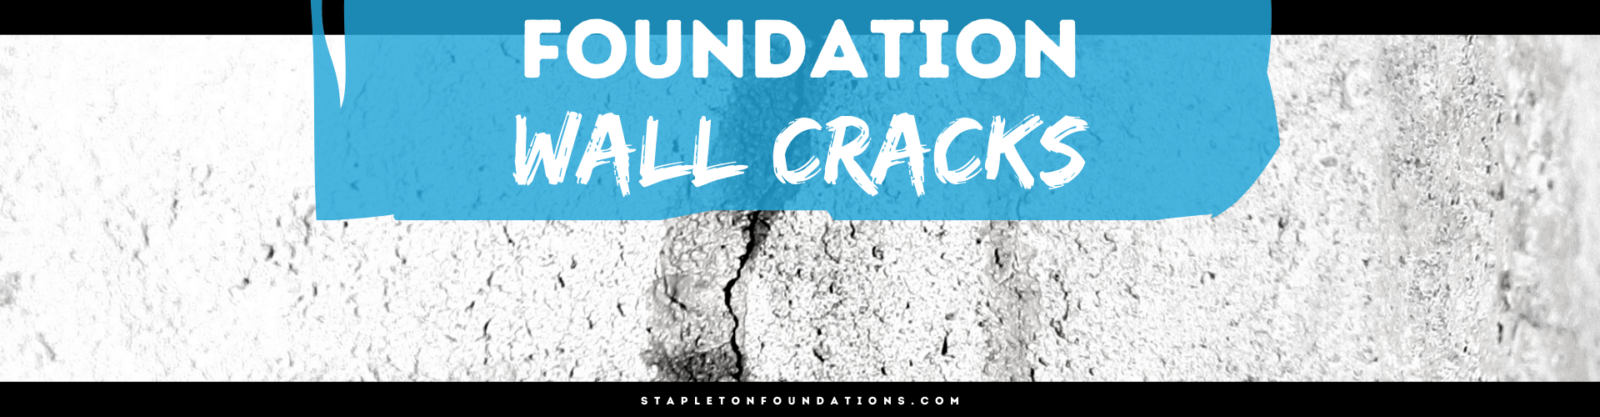 types of foundation wall cracks